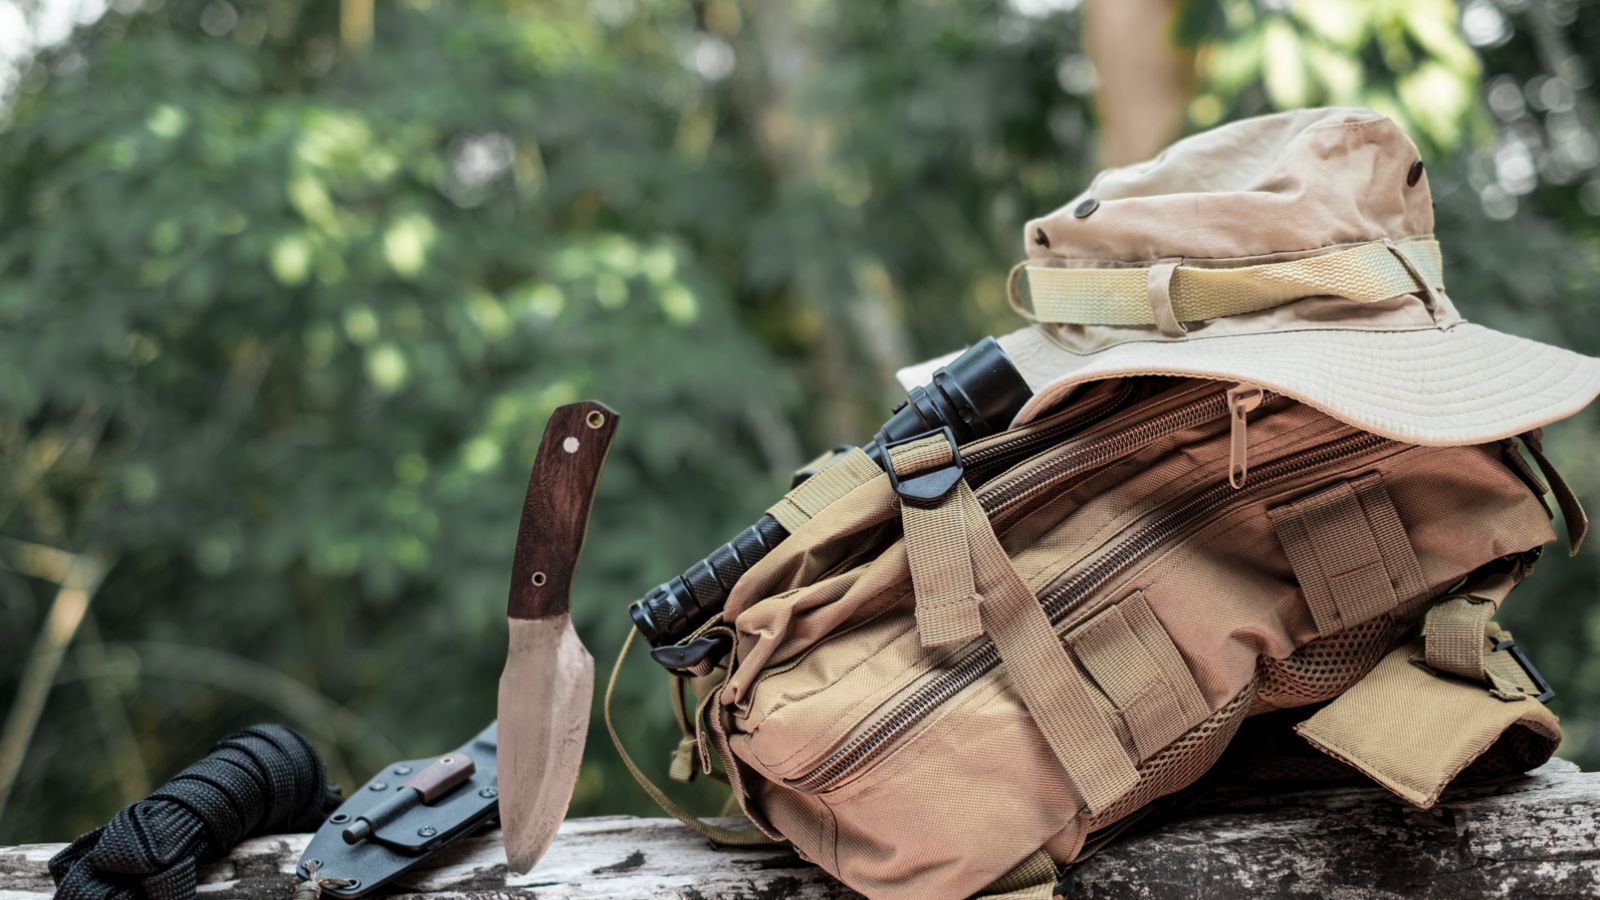 <p>In order to survive as long as possible in a zombie apocalypse, you should regularly check and maintain your survival gear. Also, remember to store your equipment properly to prevent damage. <a href="https://www.forrent.com/blog/apt_life/zombie-proof-apartment/">ForRent.com</a> recommends looking around your home for gear that you can use to defend yourself.</p>